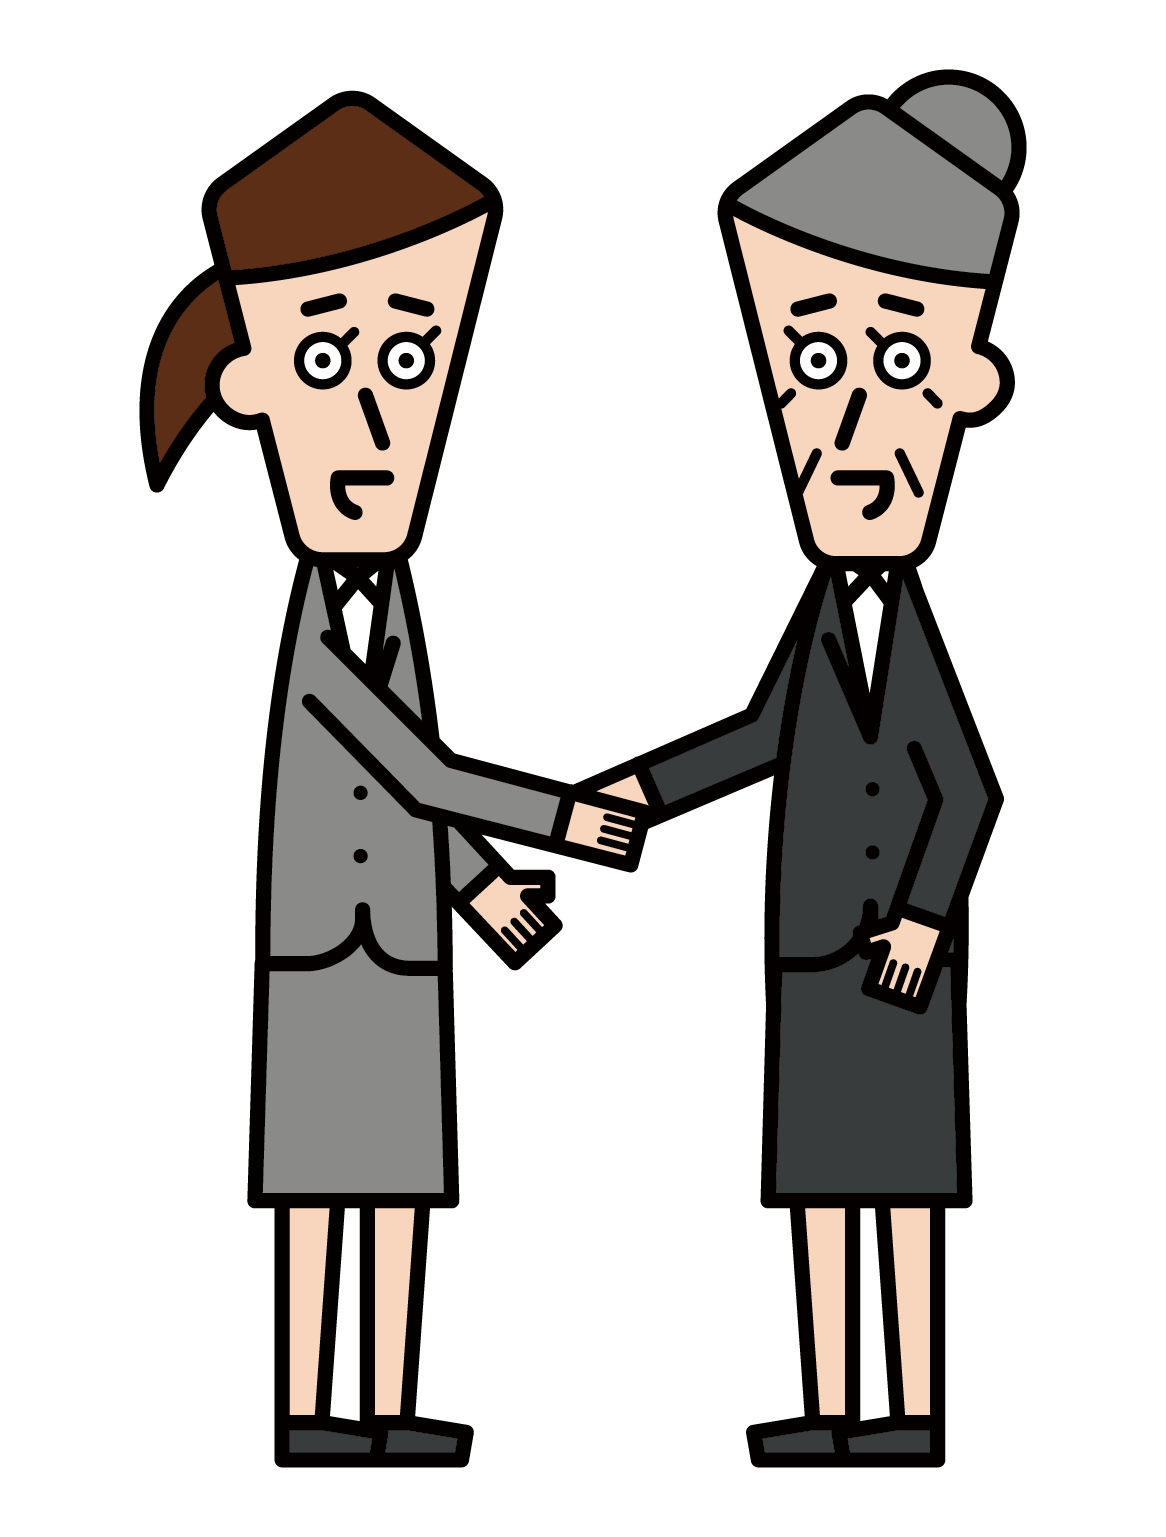 Illustration of a woman shaking hands